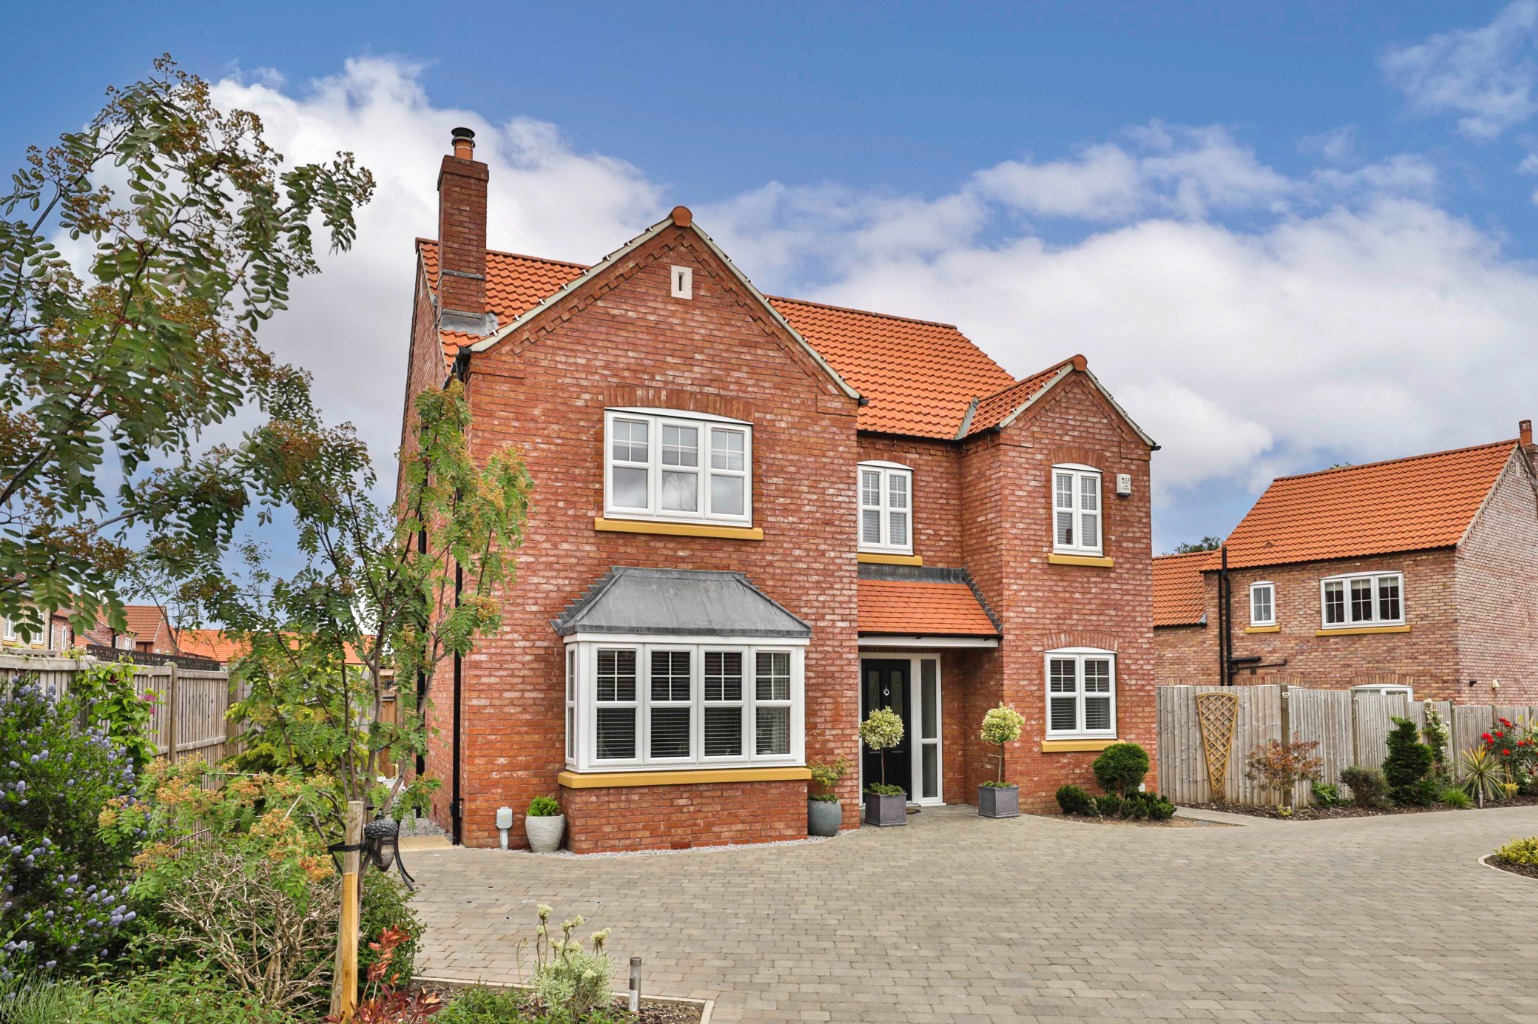 4 bed detached house for sale in Westfields Drive, Beverley - Property Image 1